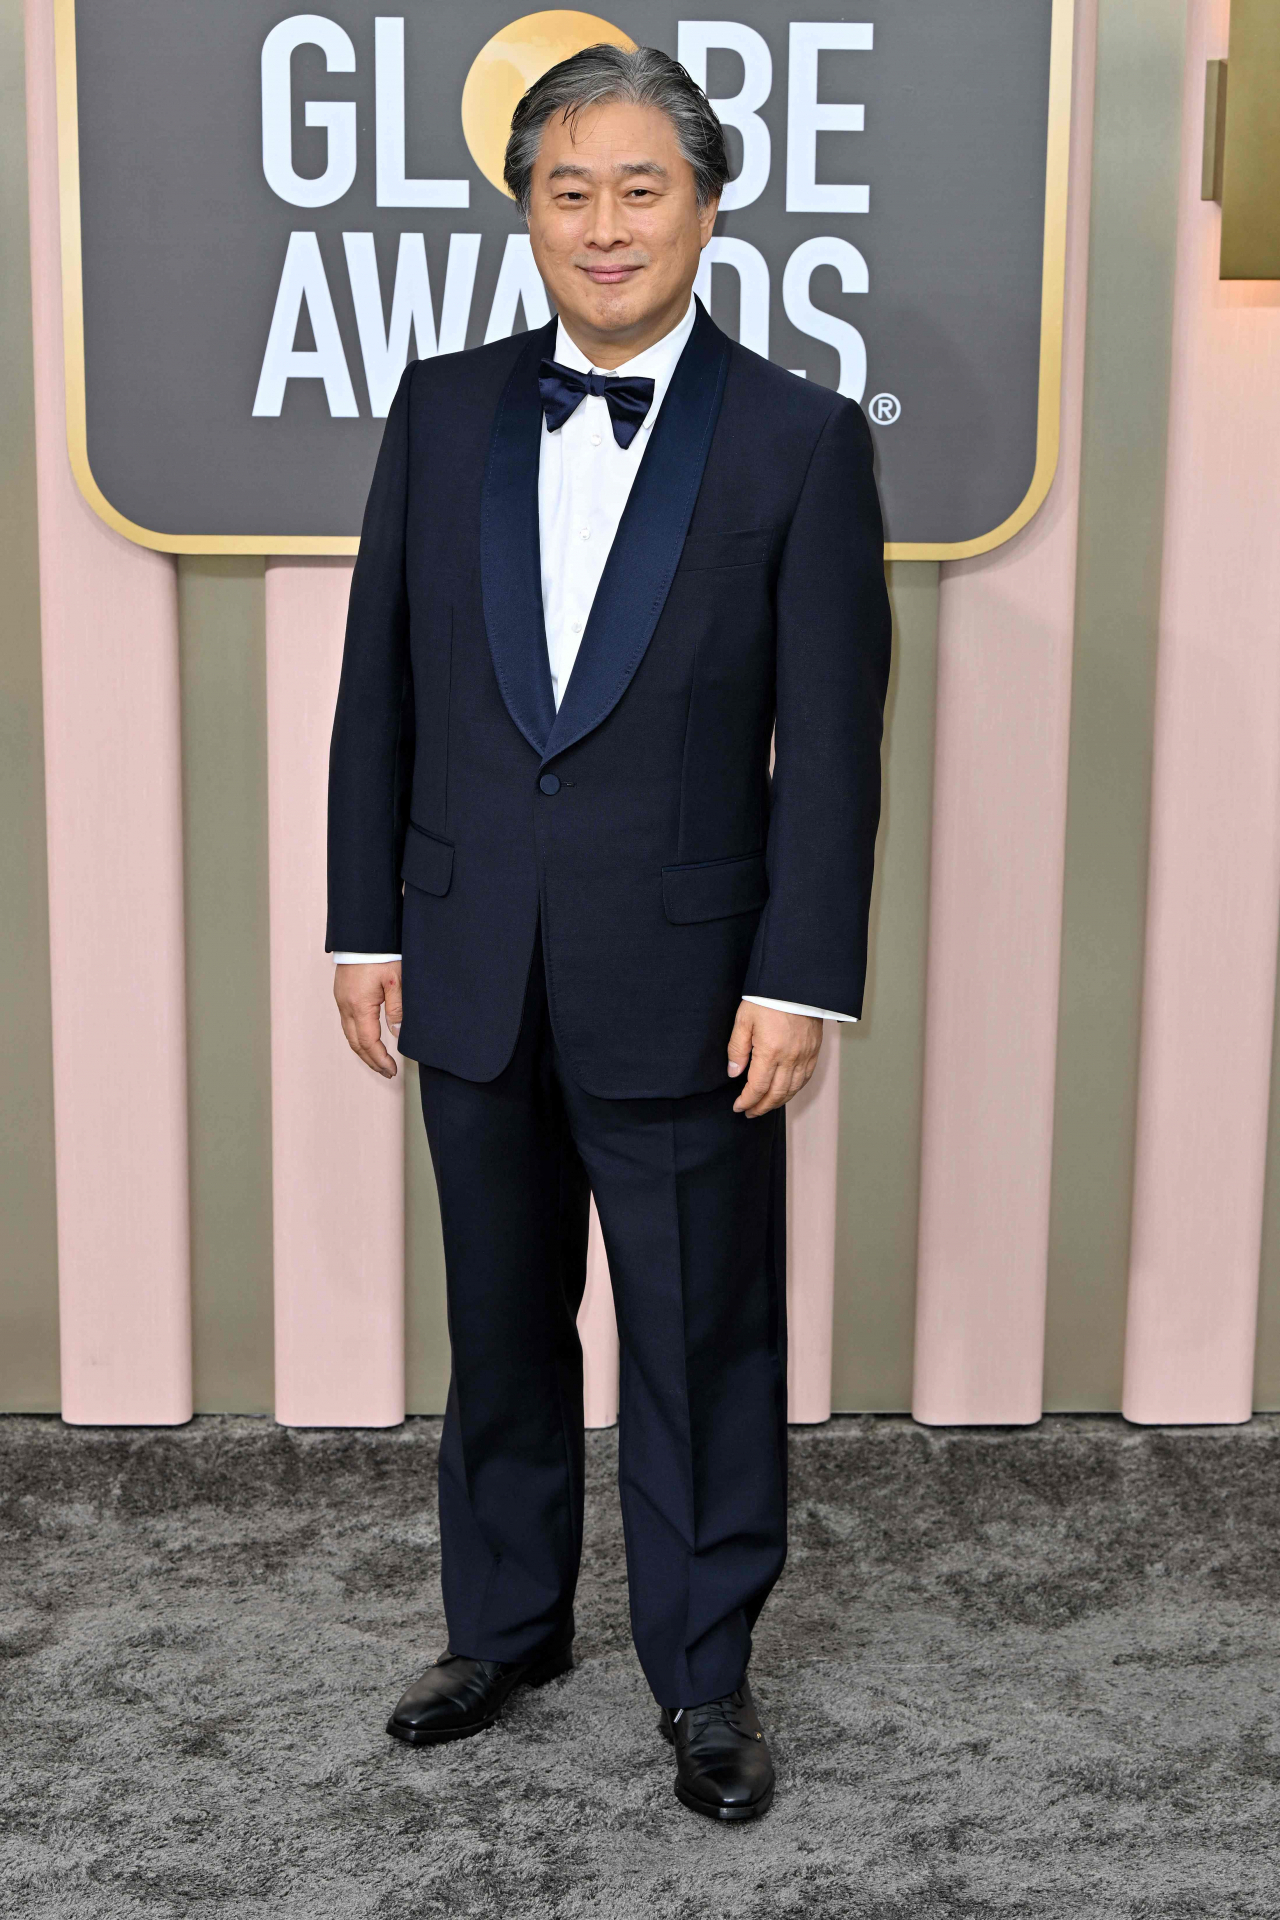 Director Park Chan-wook attends a red carpet event at the 2023 Golden Globe Awards held at Beverly Hilton in Beverly Hills, California, Tuesday local time. (Yonhap-EPA)